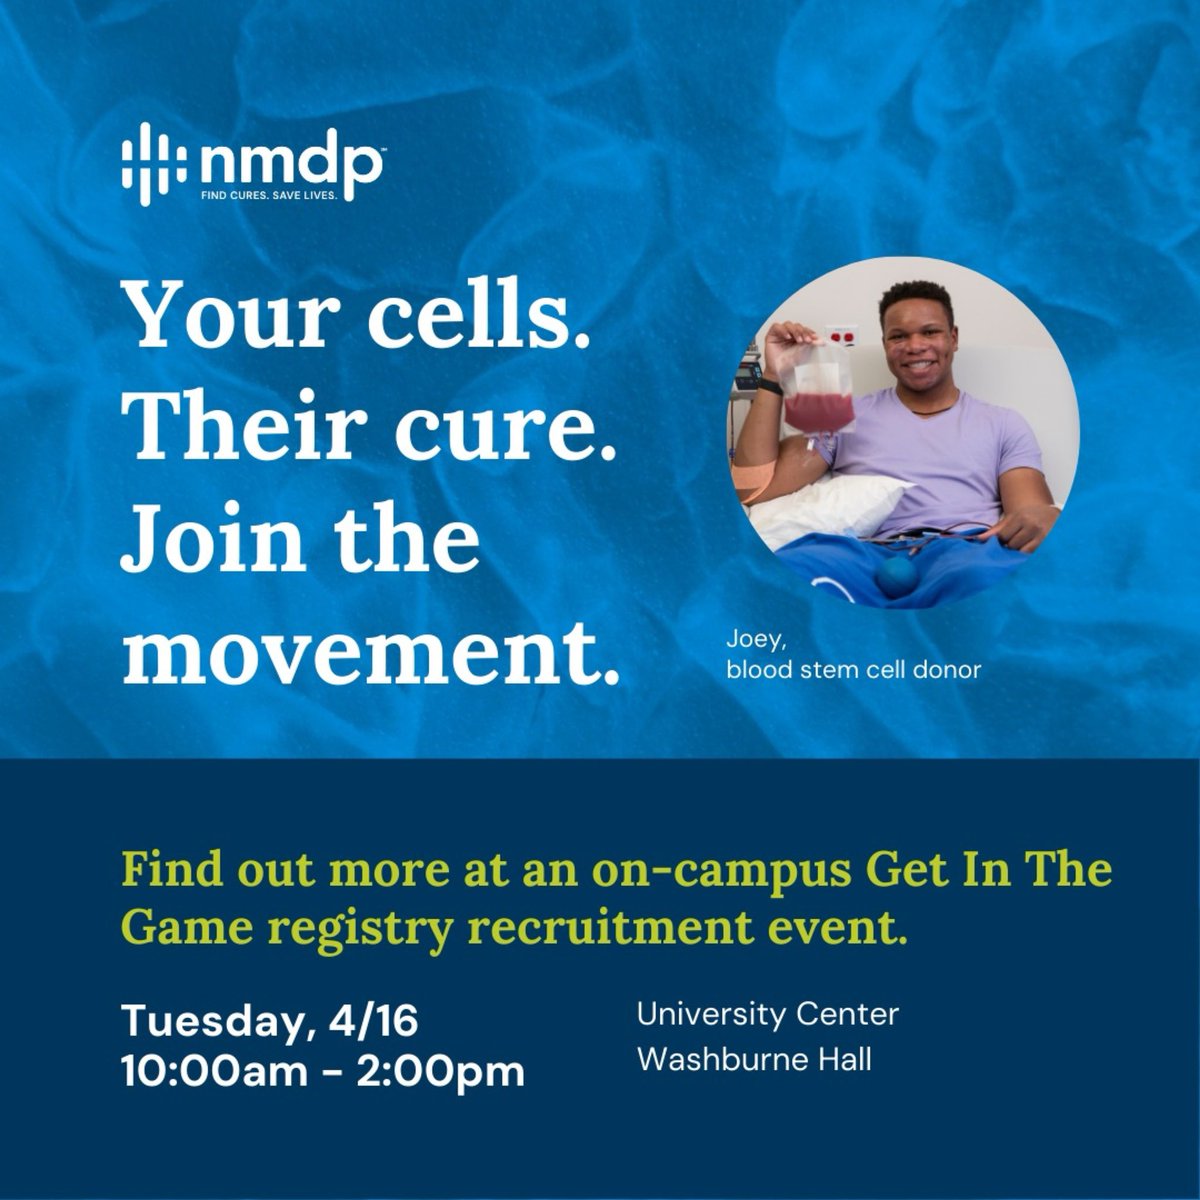 Excited to Get in the Game tomorrow from 10am-2pm in the UC @pacificu to help enroll potential genetic matches for people suffering from different forms of blood cancer. A literal opportunity to save a life!